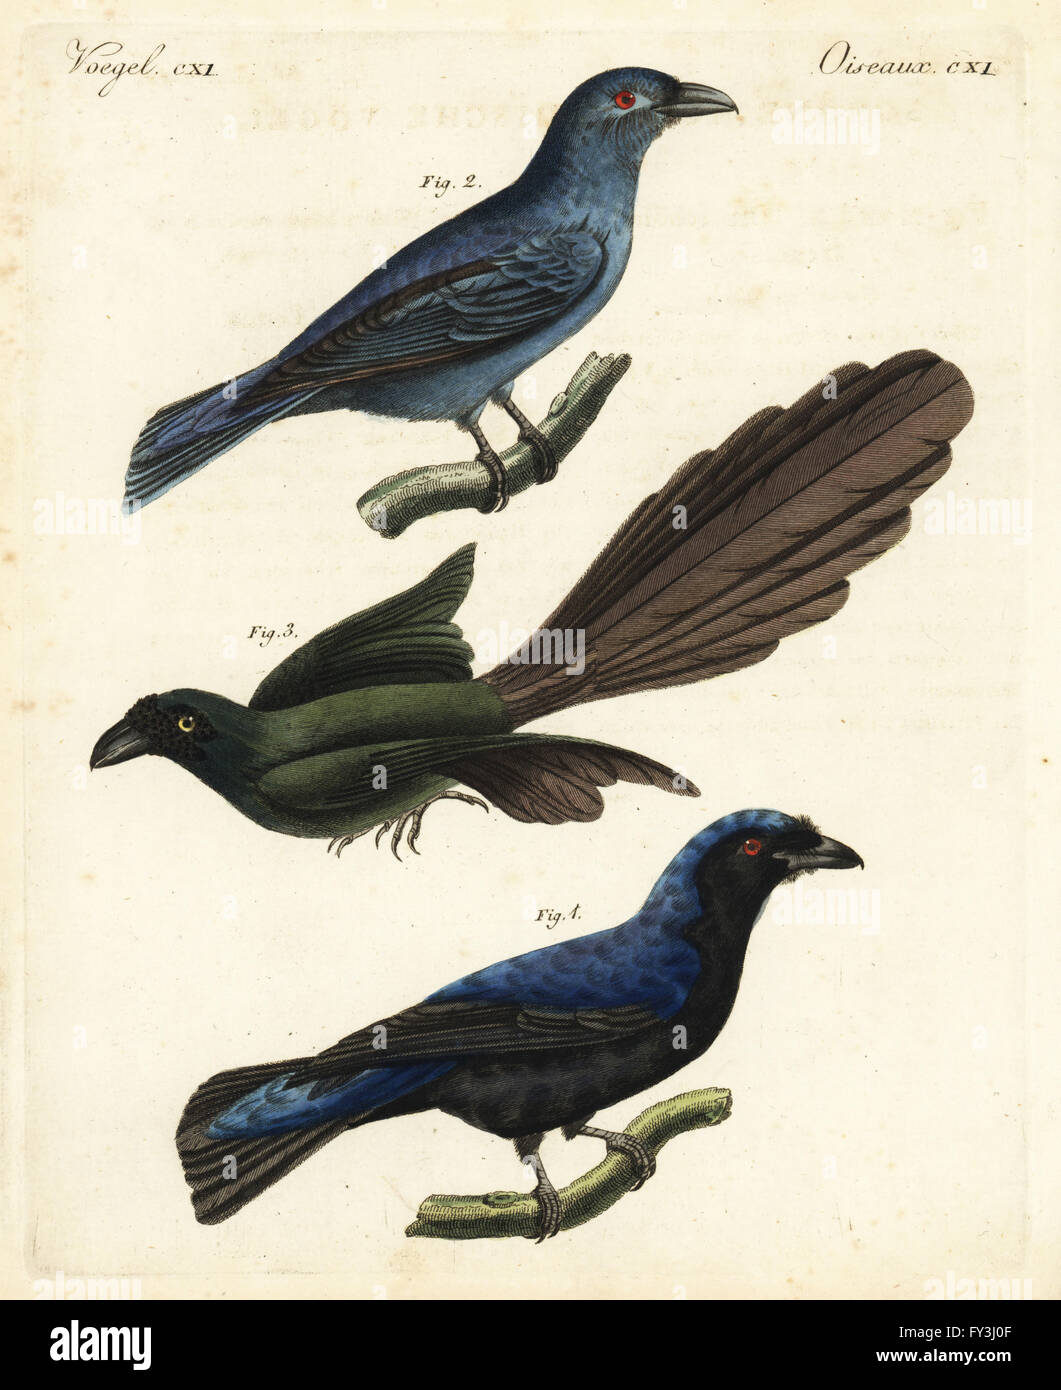 Asian fairy-bluebird, Irena puella, male 1, female 2, and racket-tailed treepie, Crypsirina temia 3. Copied from Horsfeld's Zoological Researches in Java. Handcoloured copperplate engraving from Friedrich Johann Bertuch's Bilderbuch fur Kinder (Picture Book for Children), Weimar, 1823. Stock Photo